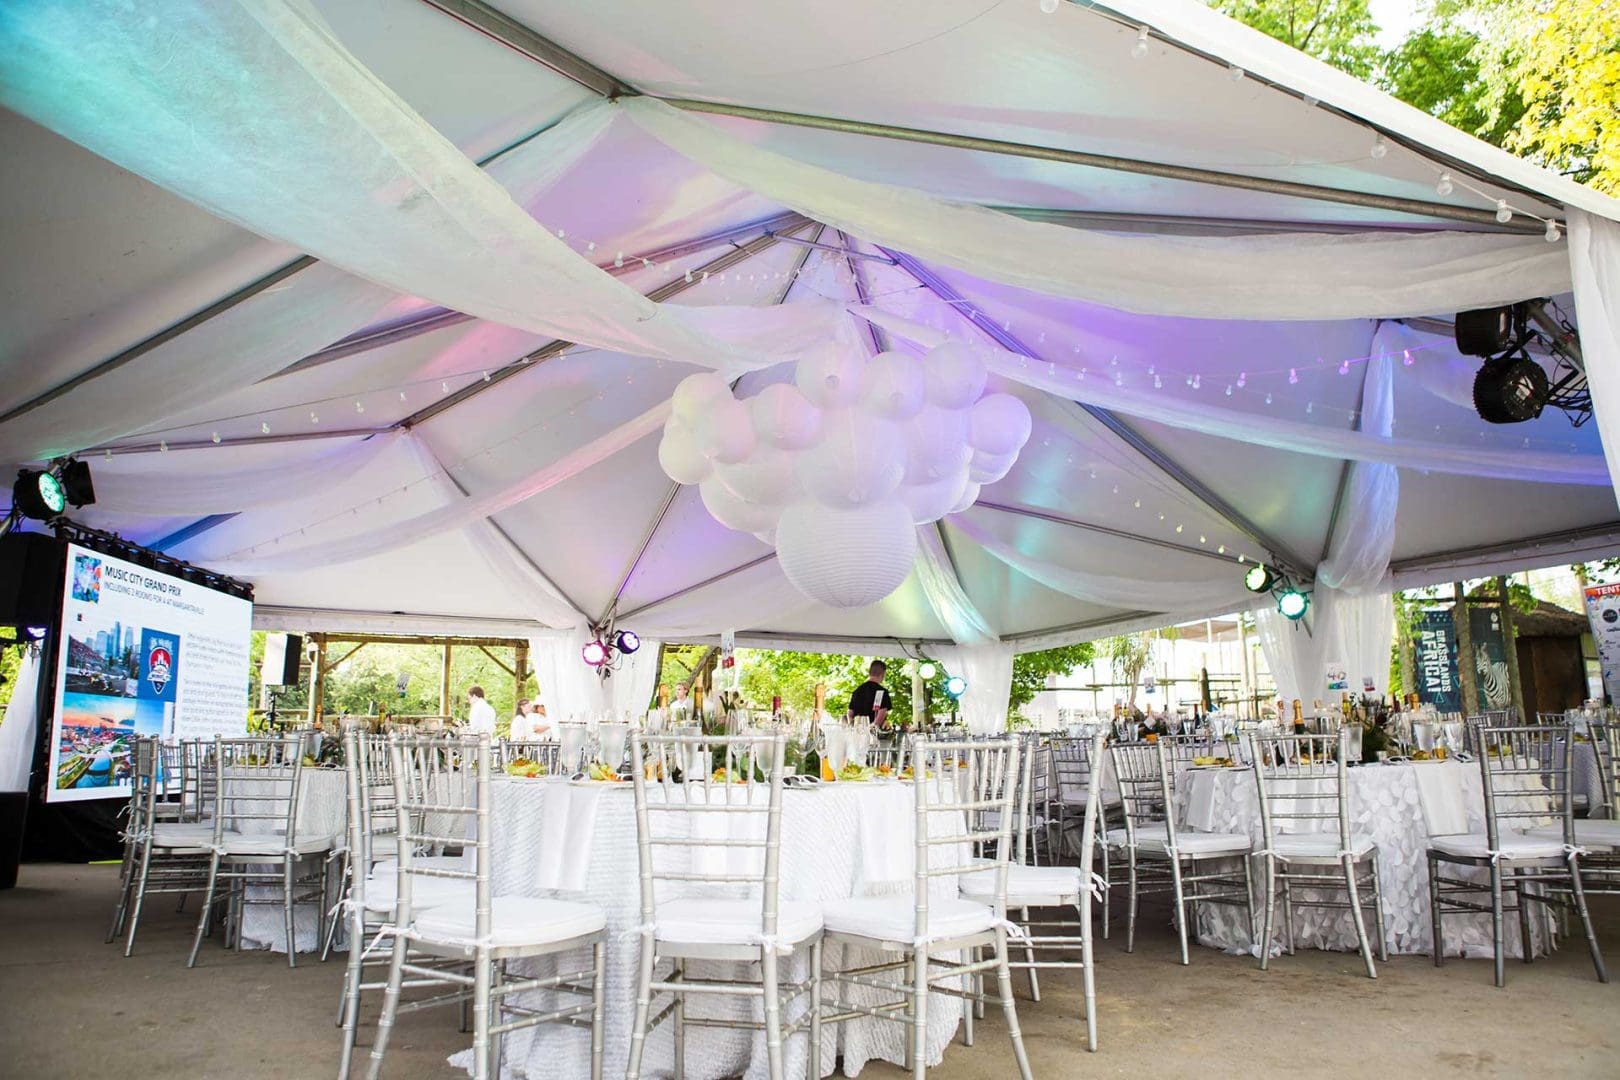 Outdoor table setting under tent for event